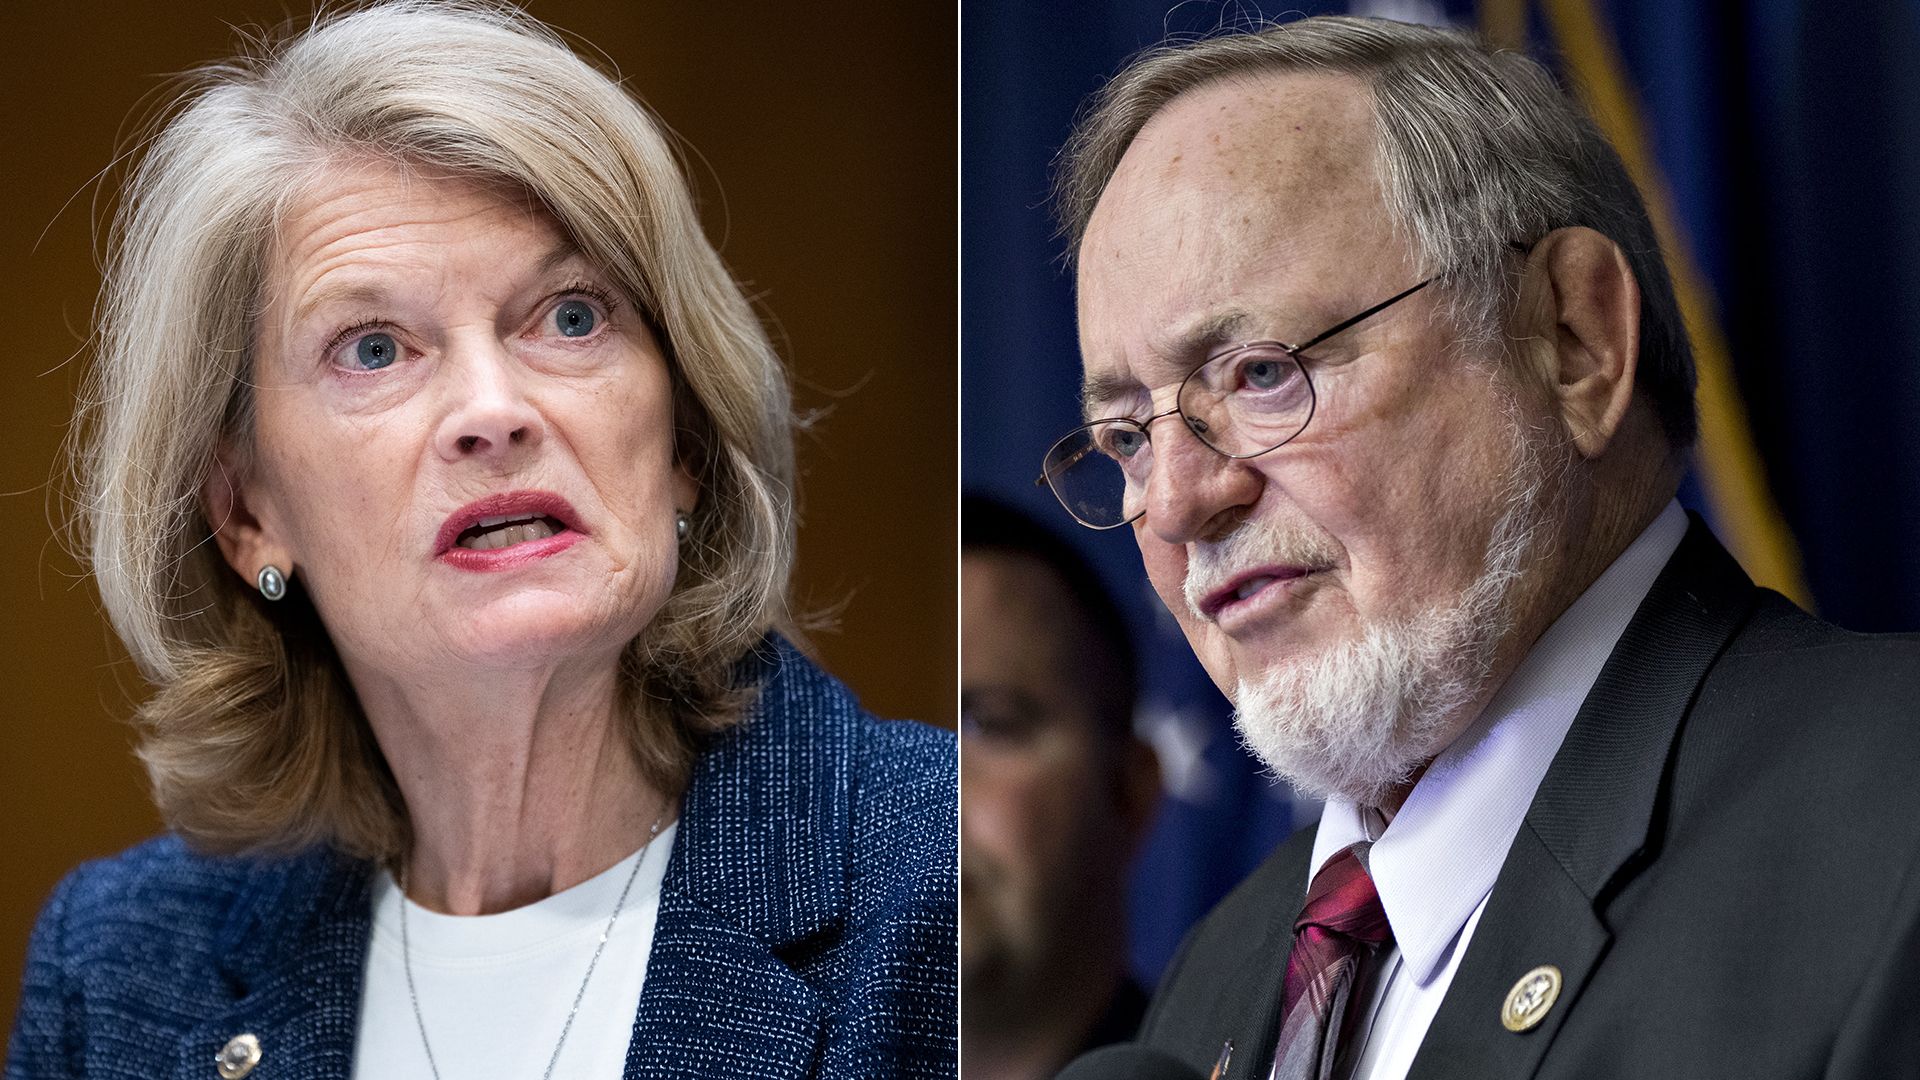 Sen. Lisa Murkowski and the late Rep. Don Young are seen in a side-by-sign photo array.